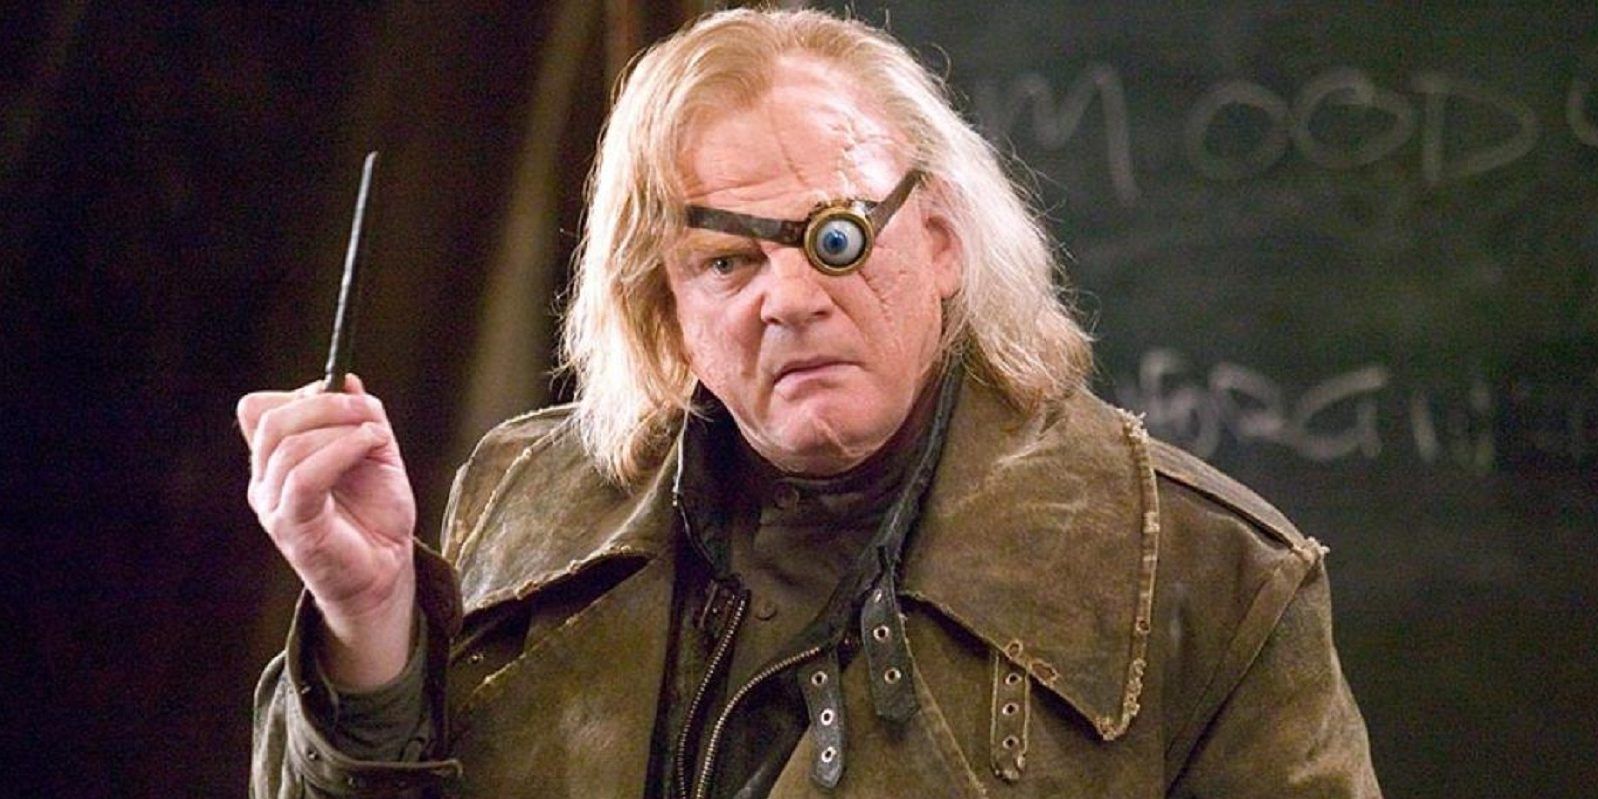 Mad Eye Moody holding a wand